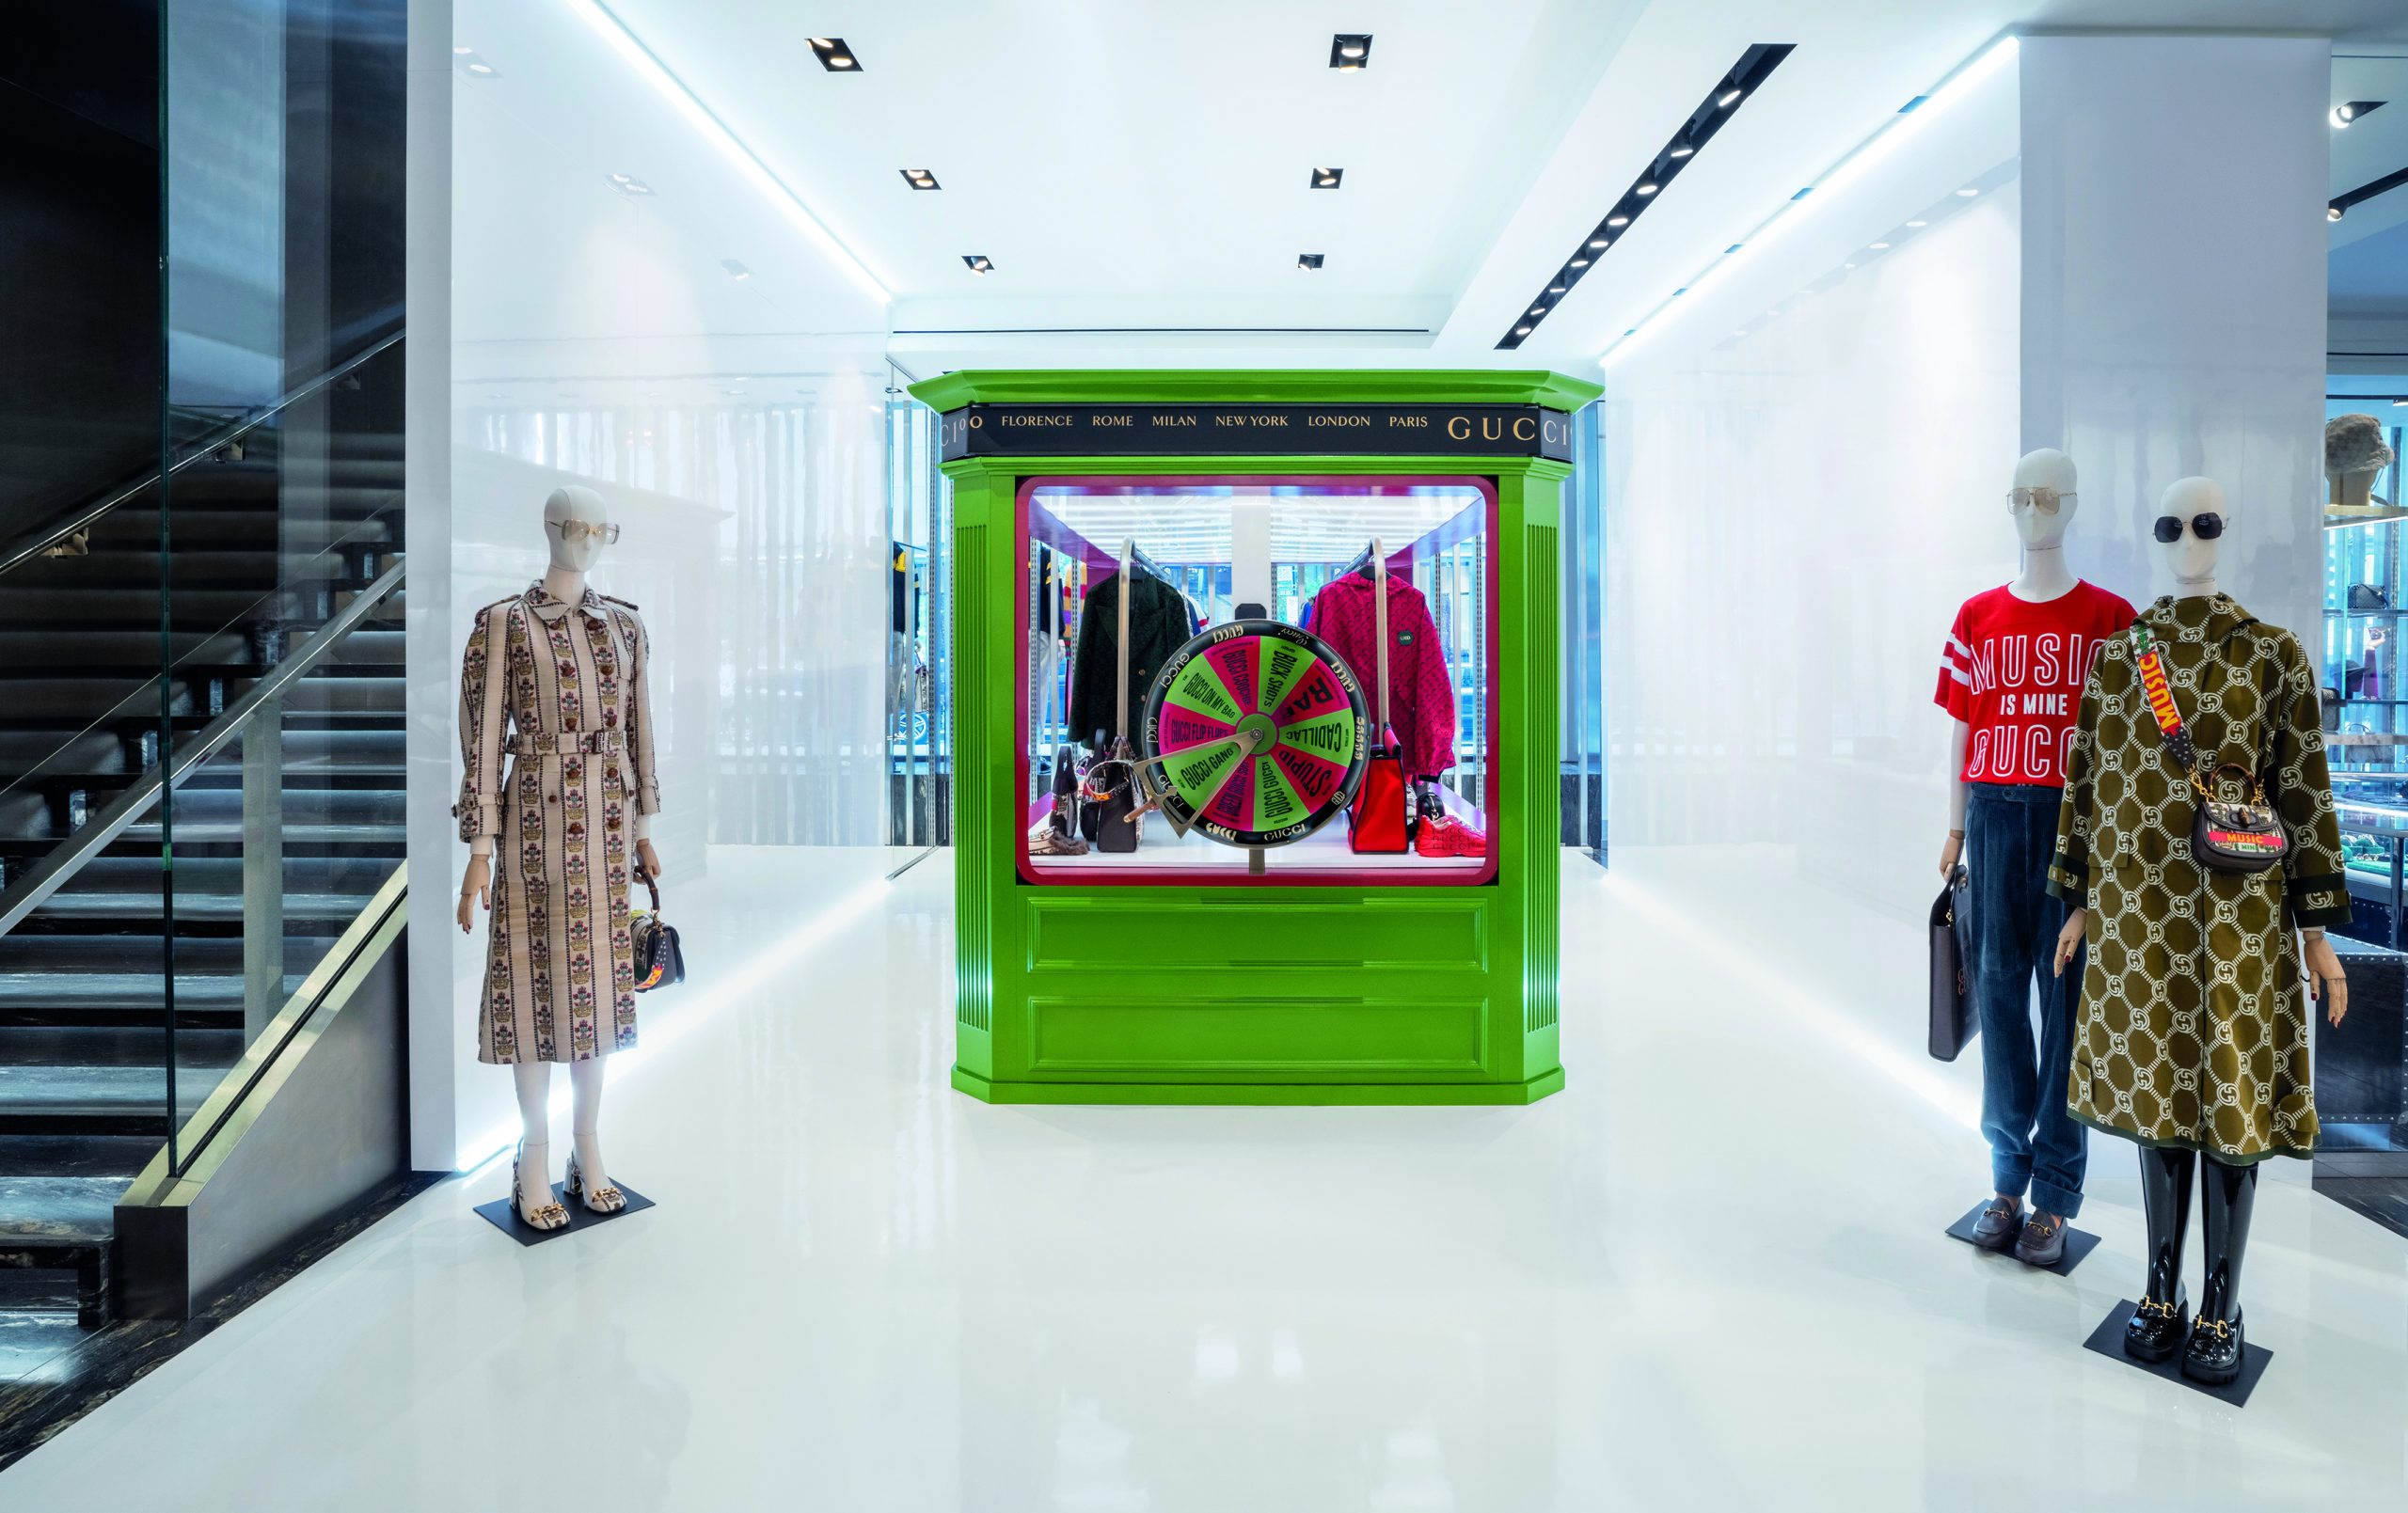 Gucci Exclusive Installations and Window Takeovers at Saks Fifth Avenue